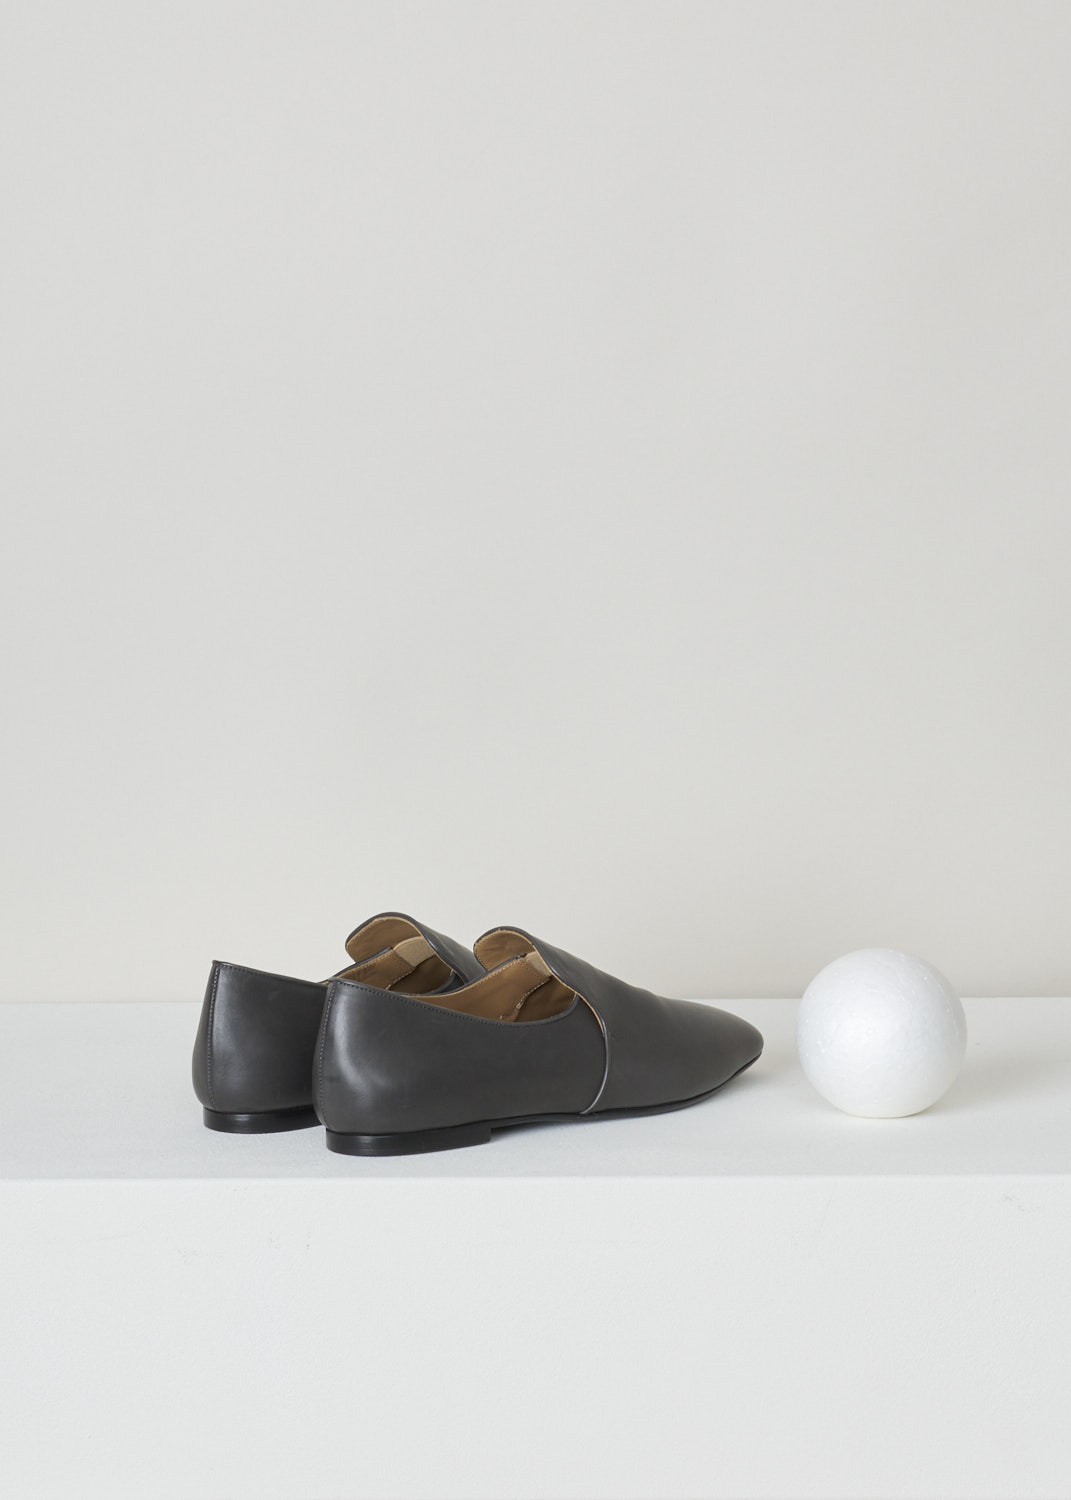 The Row, Charcoal coloured leather alys slipper, F1005_L64_COL, grey, back, Made from a minimalist perspective, and crafted out of butter-soft calfskin. Featuring a rounded toe vamp and comes with grey satin piping on the topline. The seamless lining ensures they can be worn with or without socks.